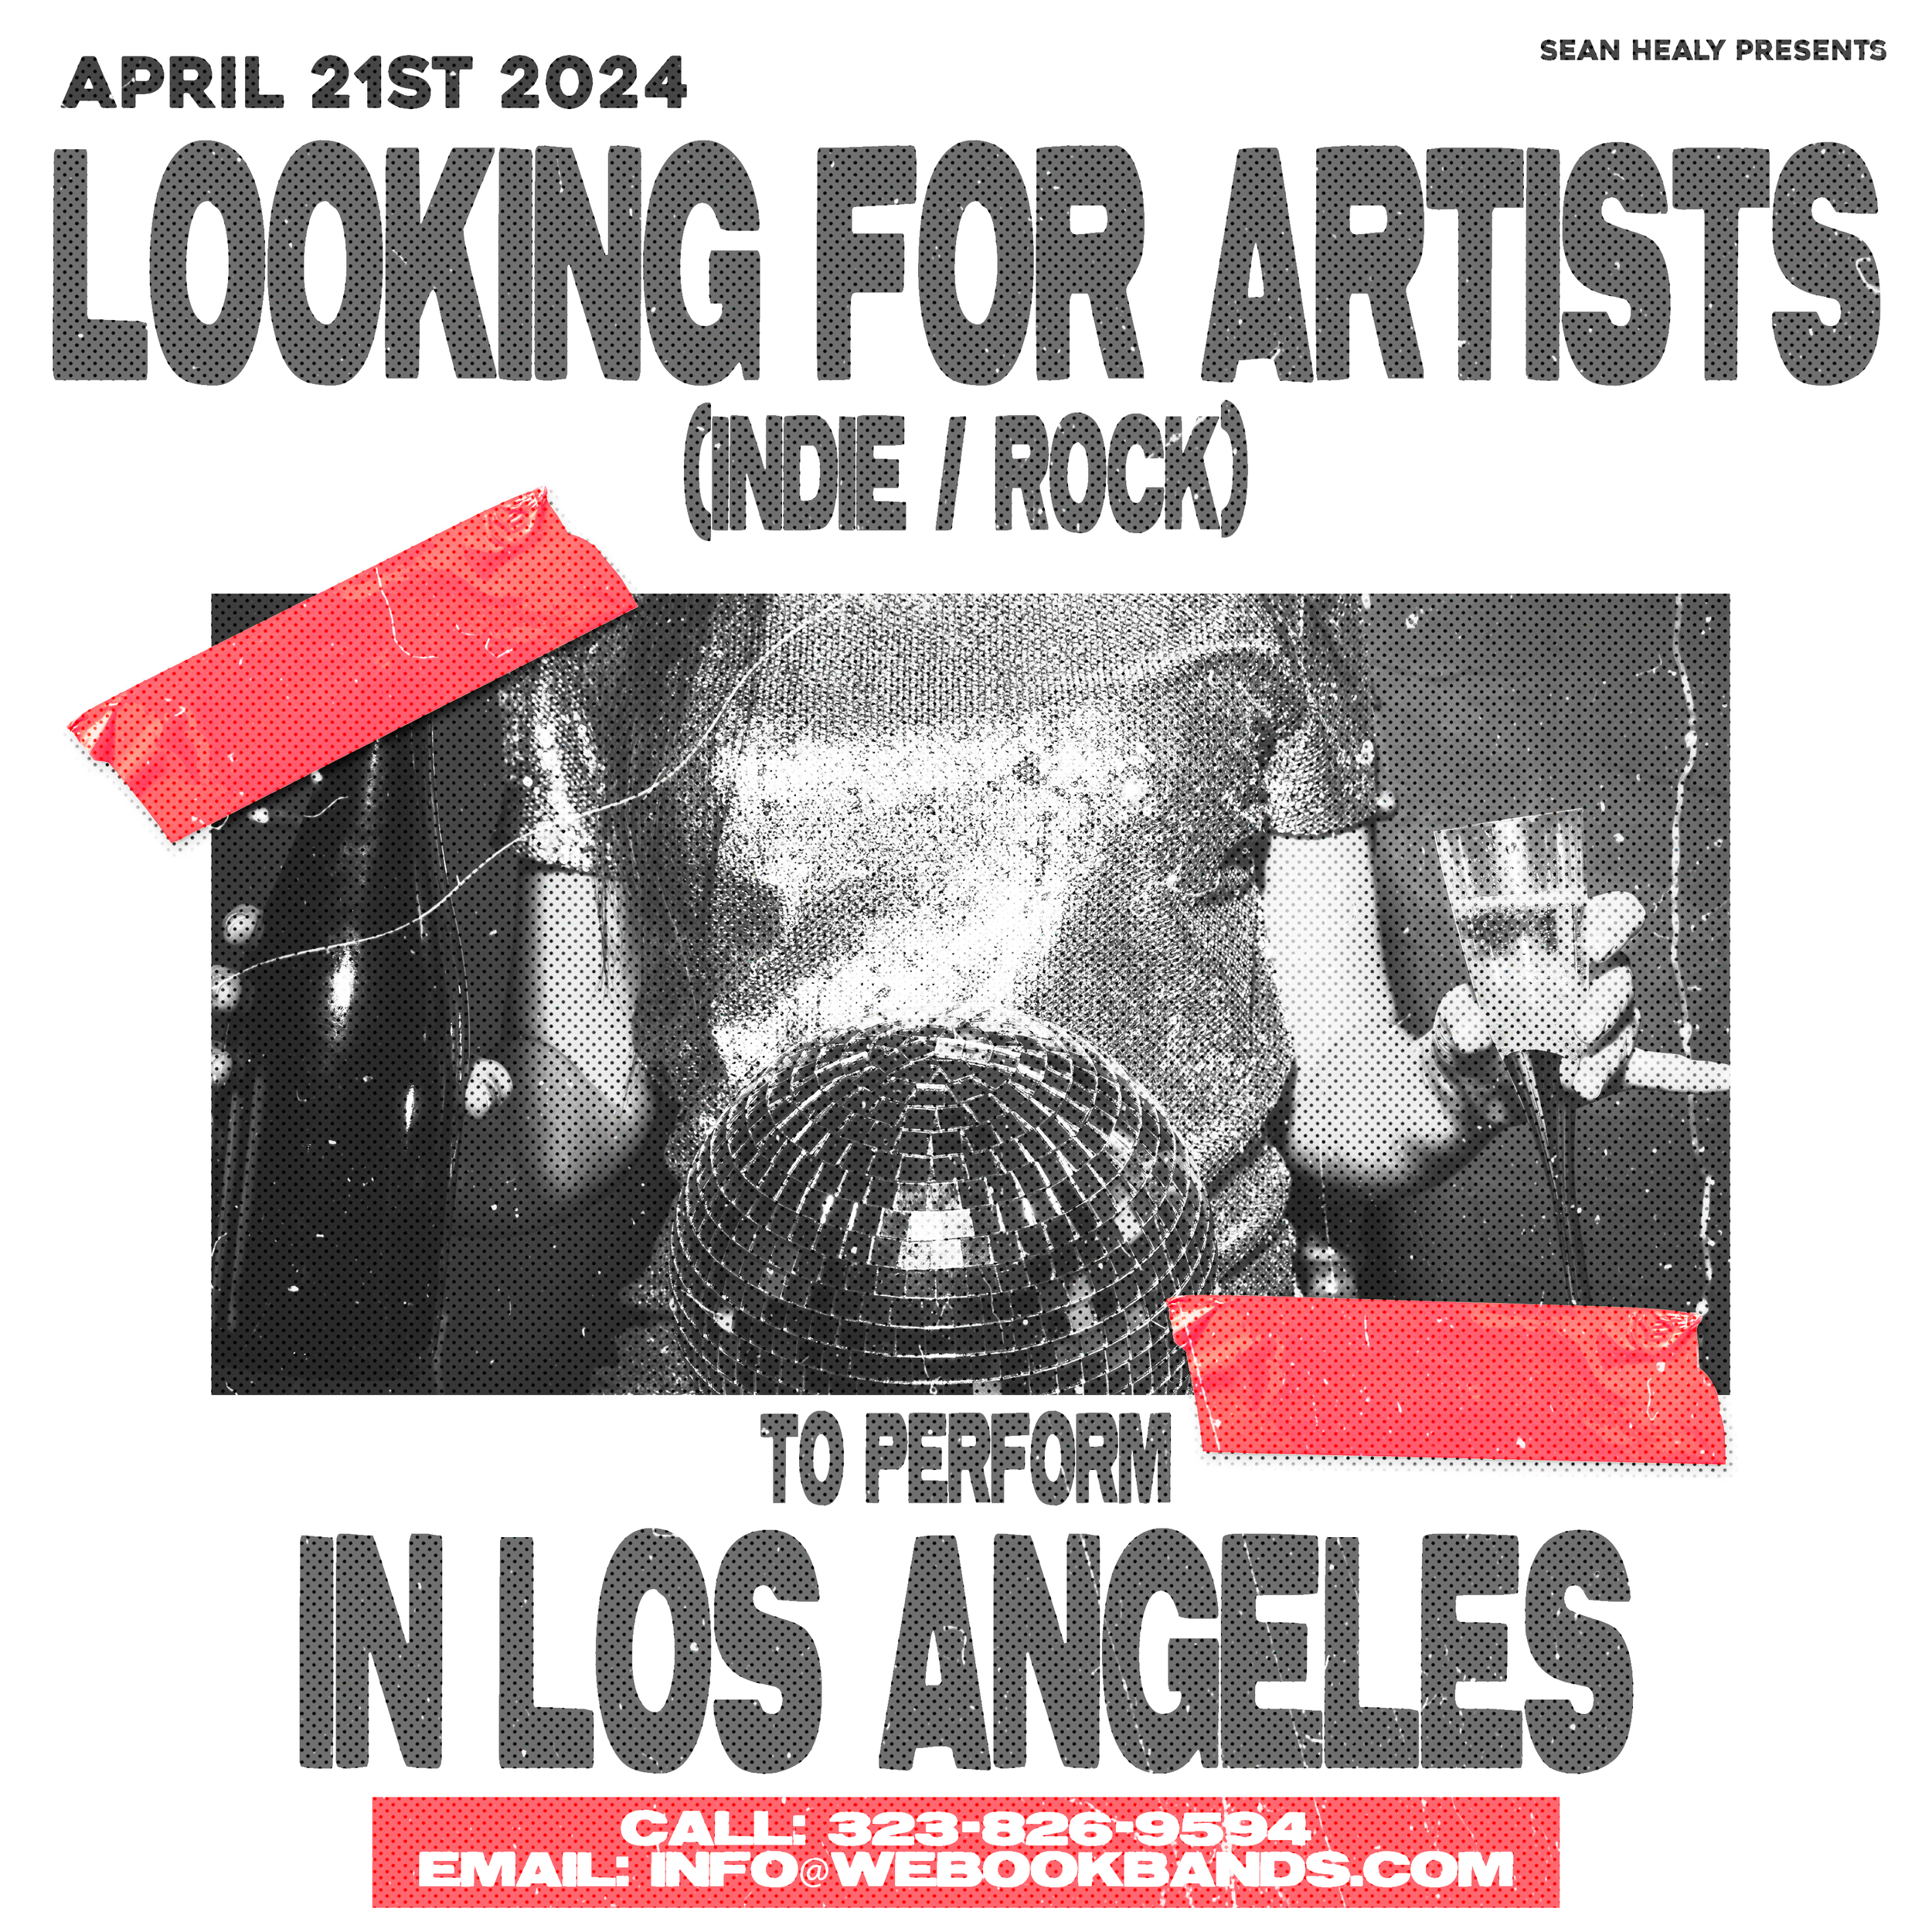 Booking Flyer 4.21.png